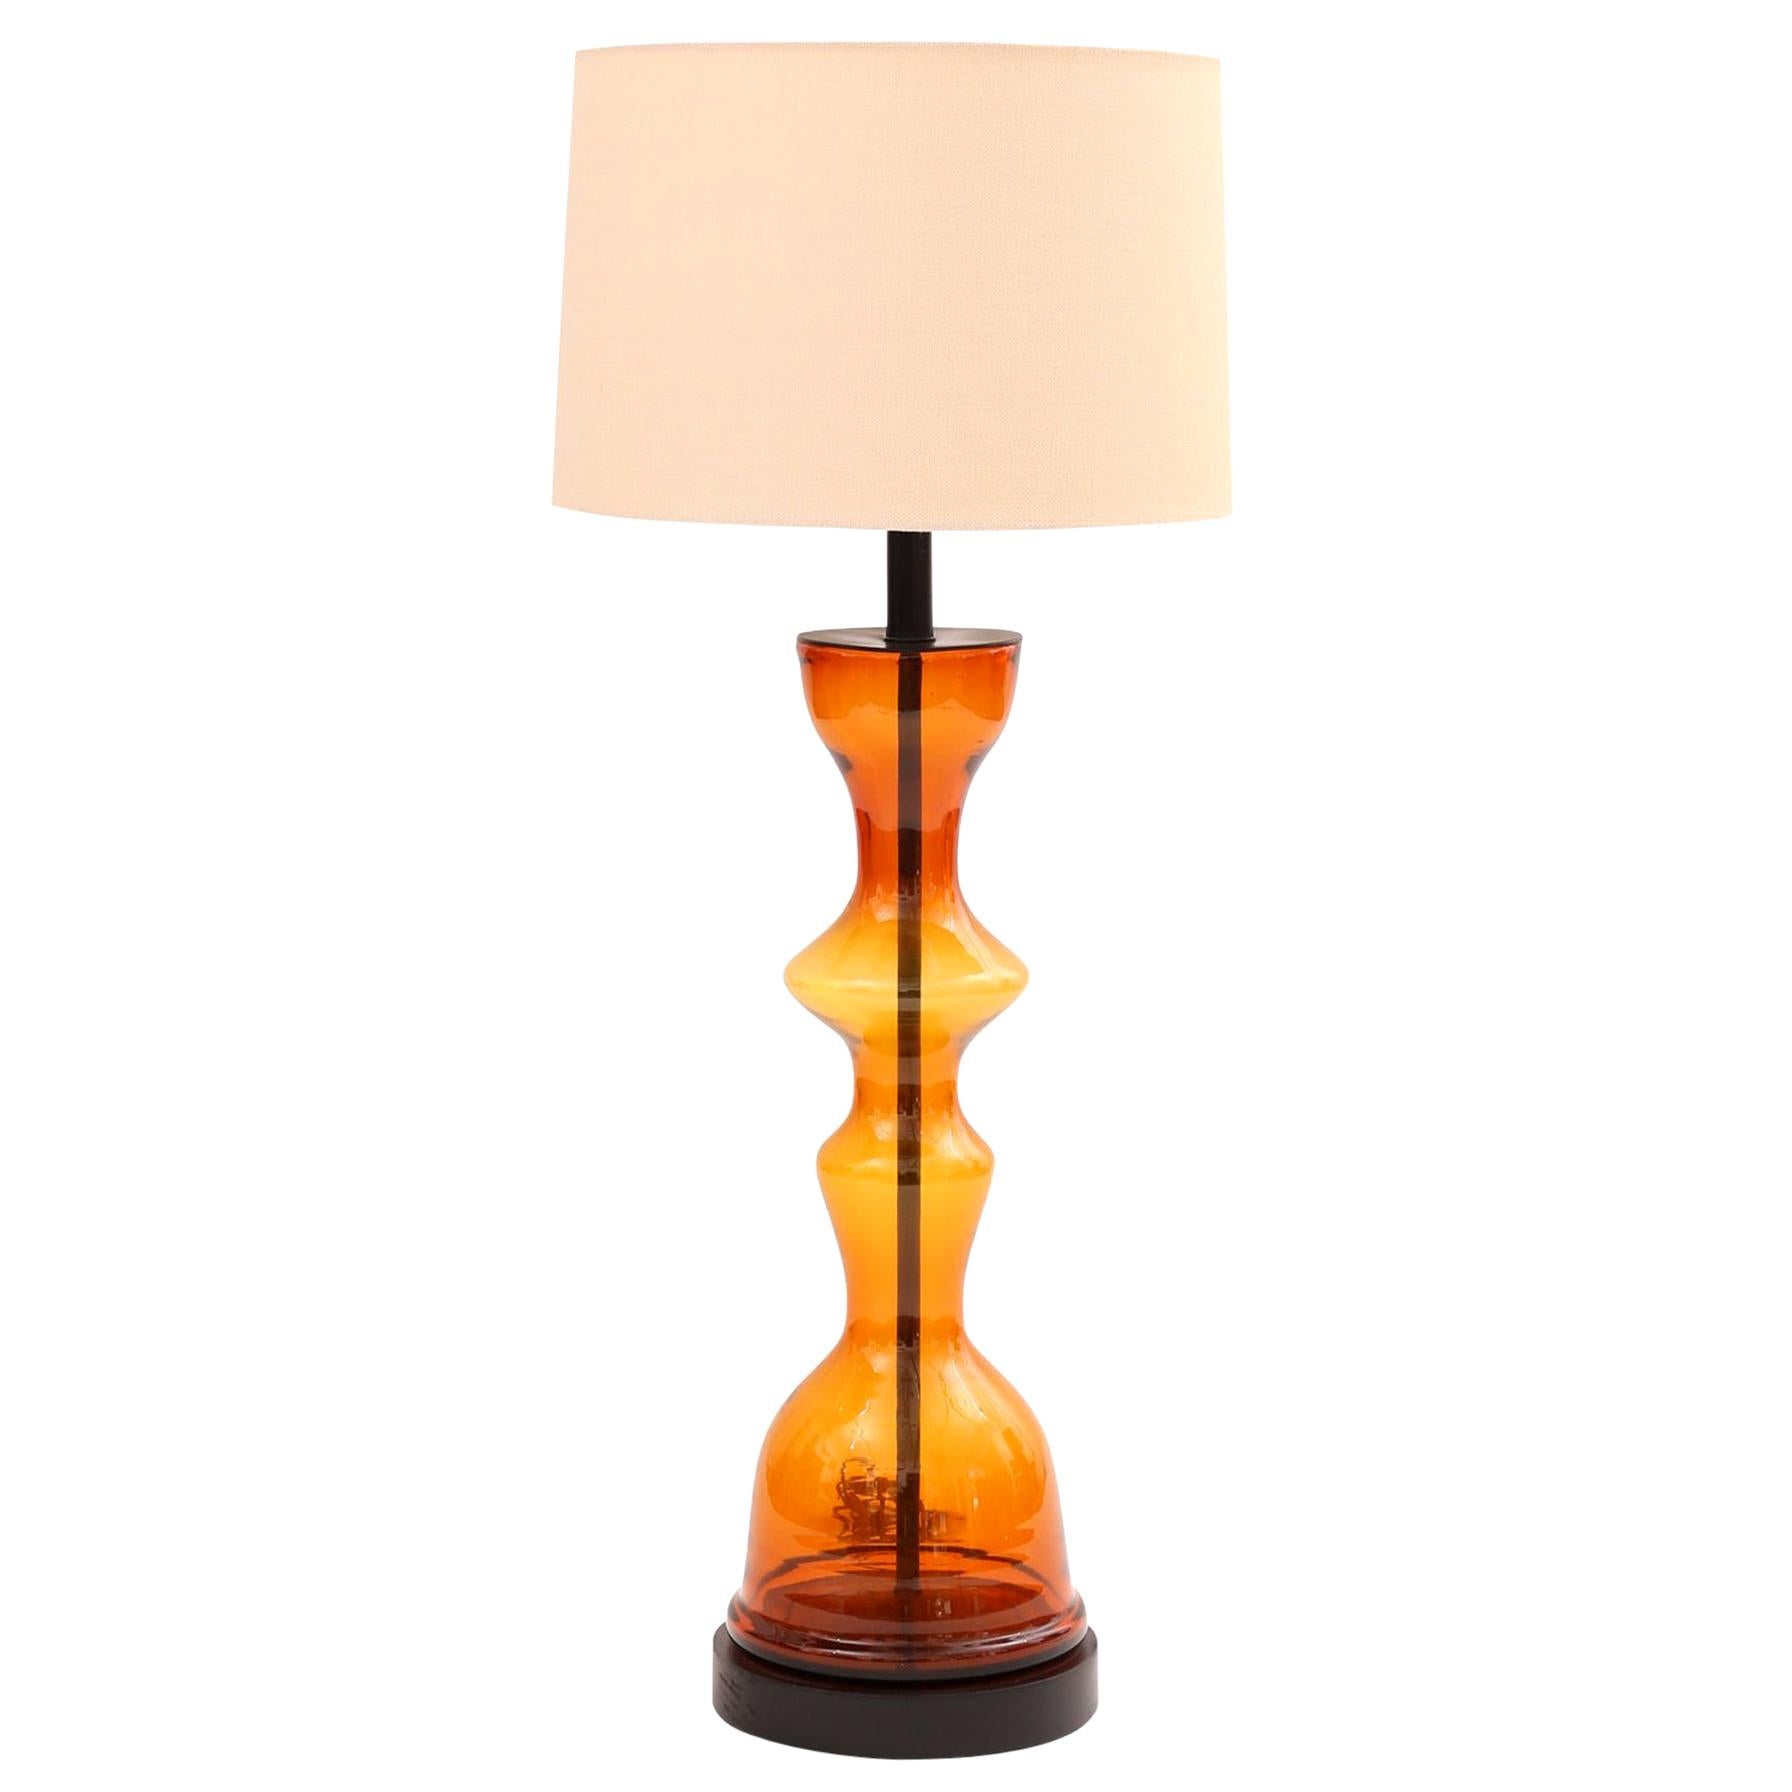 Massive Blenko Glass Table Lamp in Orange and Yellow by Wayne Husted